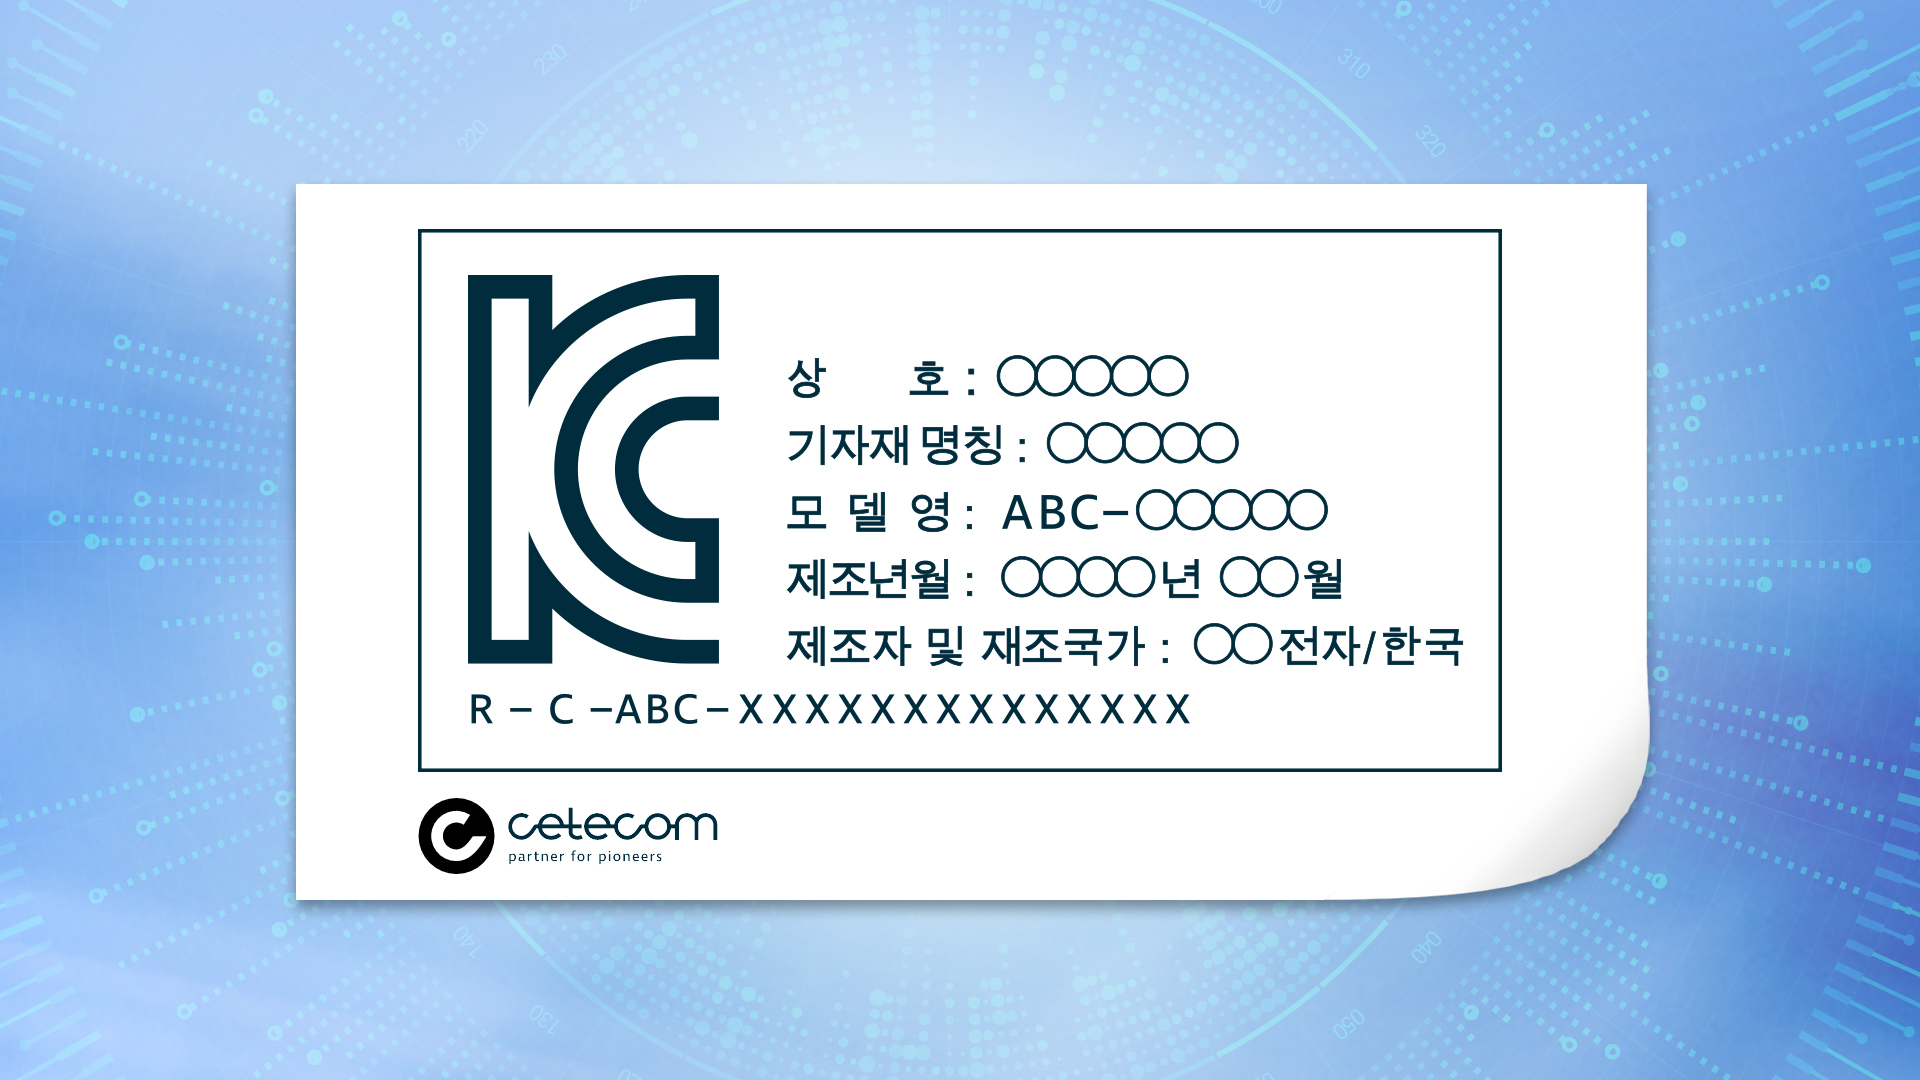 A KC certification label on which both the KC logo and the cetecom advanced logo can be seen